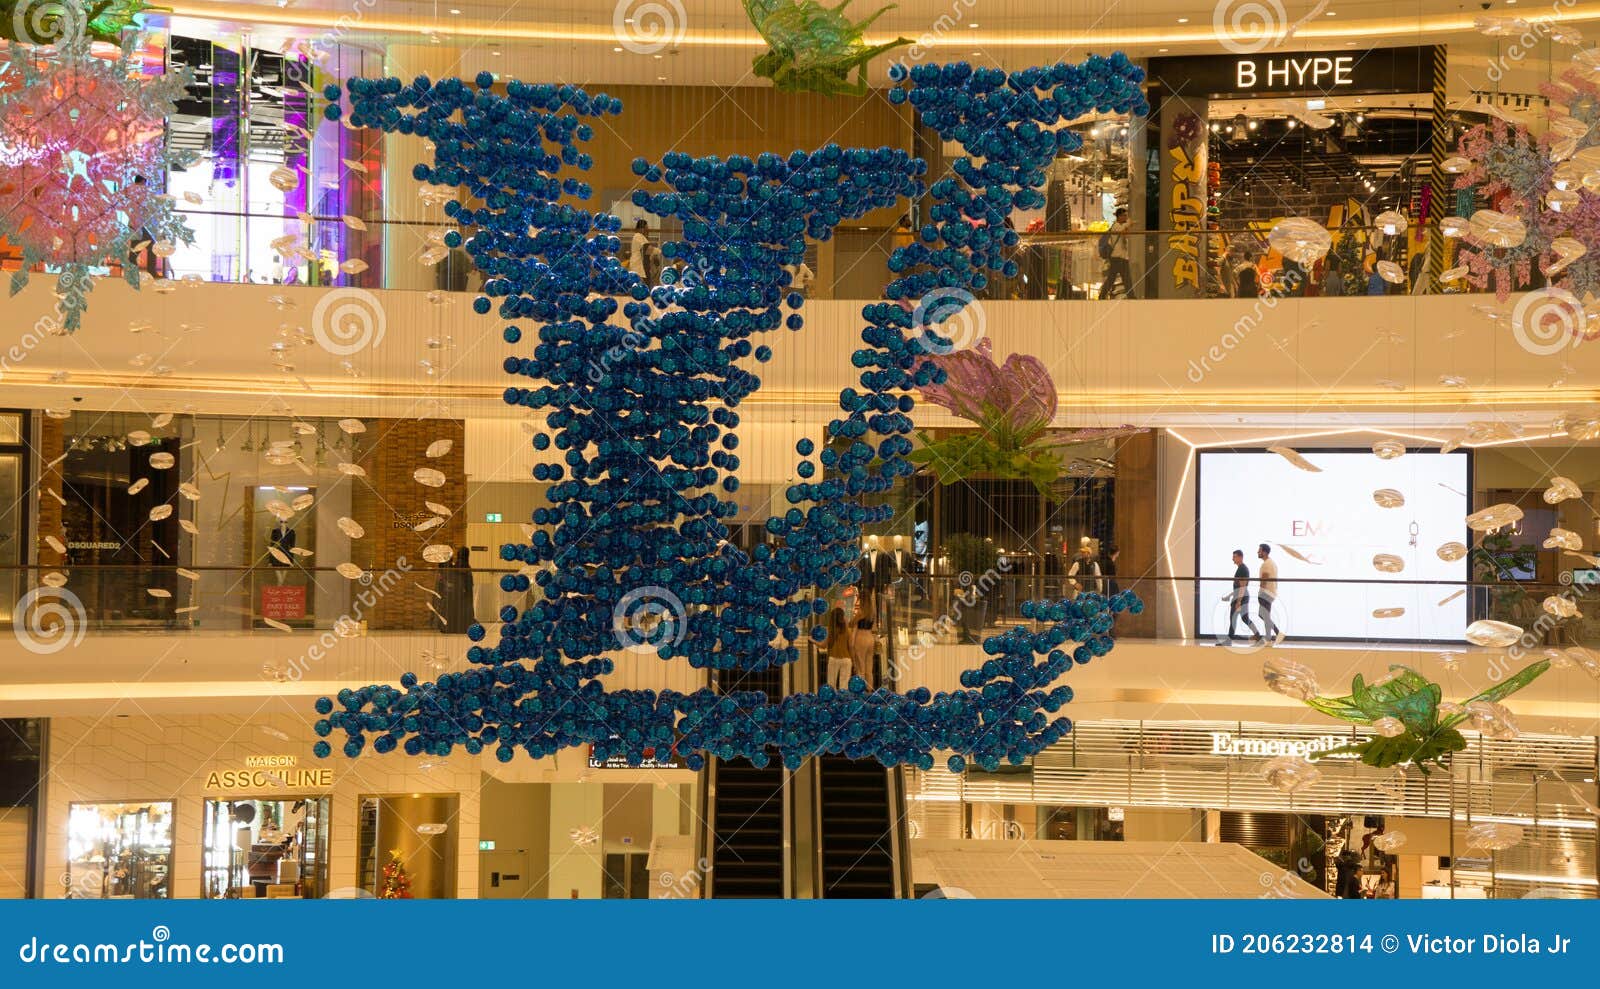 Louis Vuitton Shopping Mall Display Editorial Stock Image - Image of brand,  display: 206232814